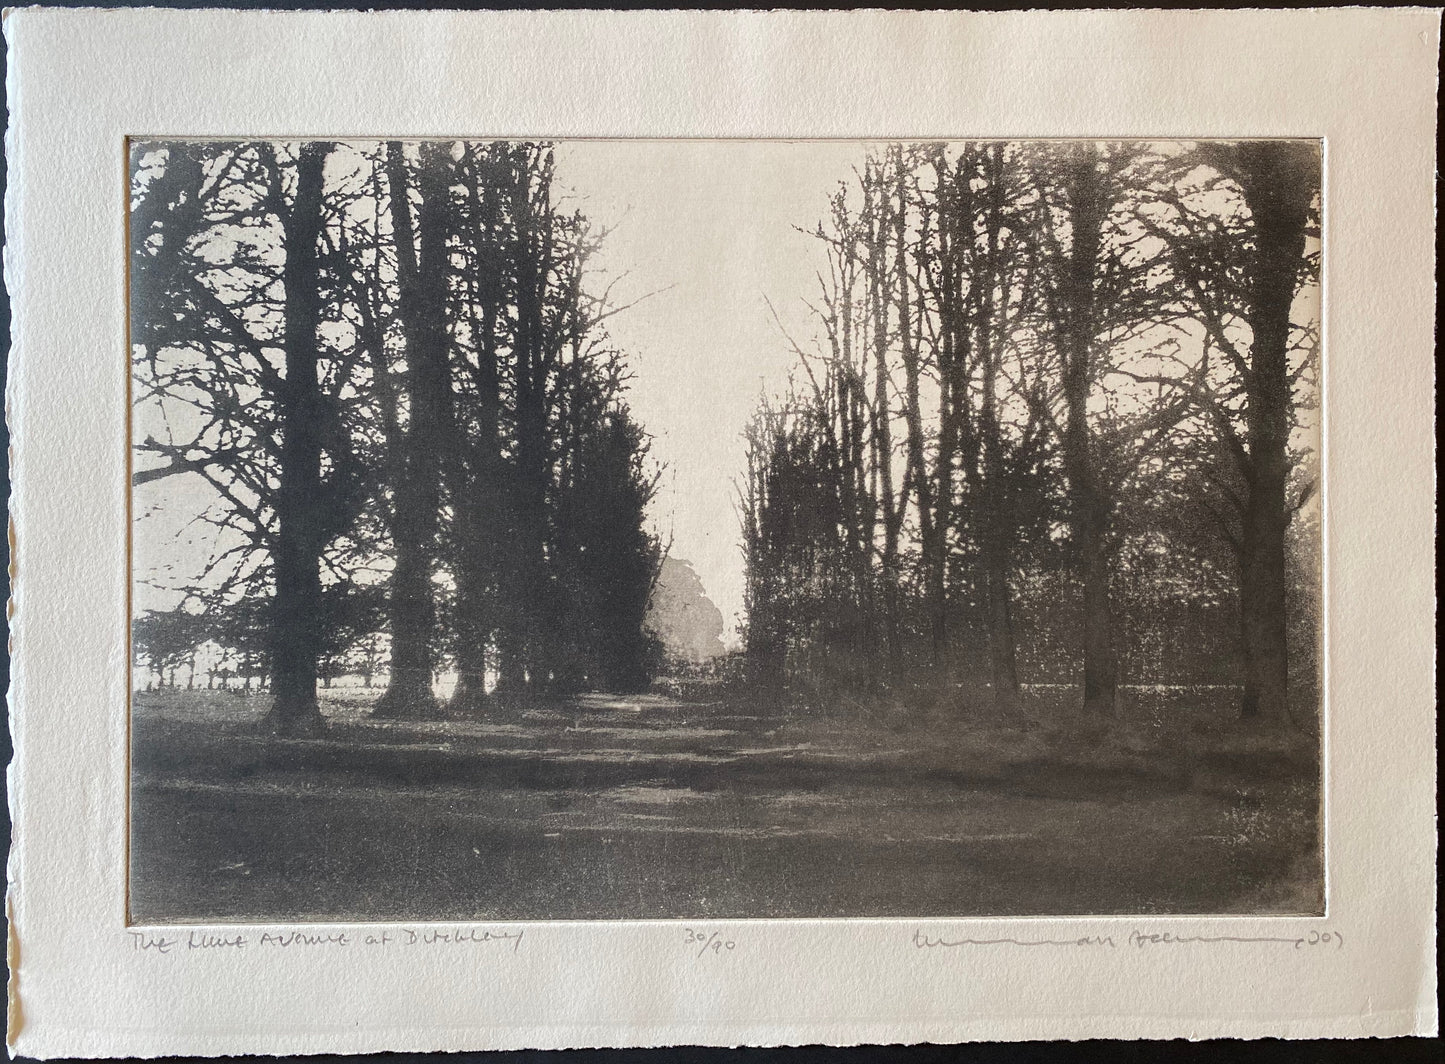 The Lime Avenue, Ditchley